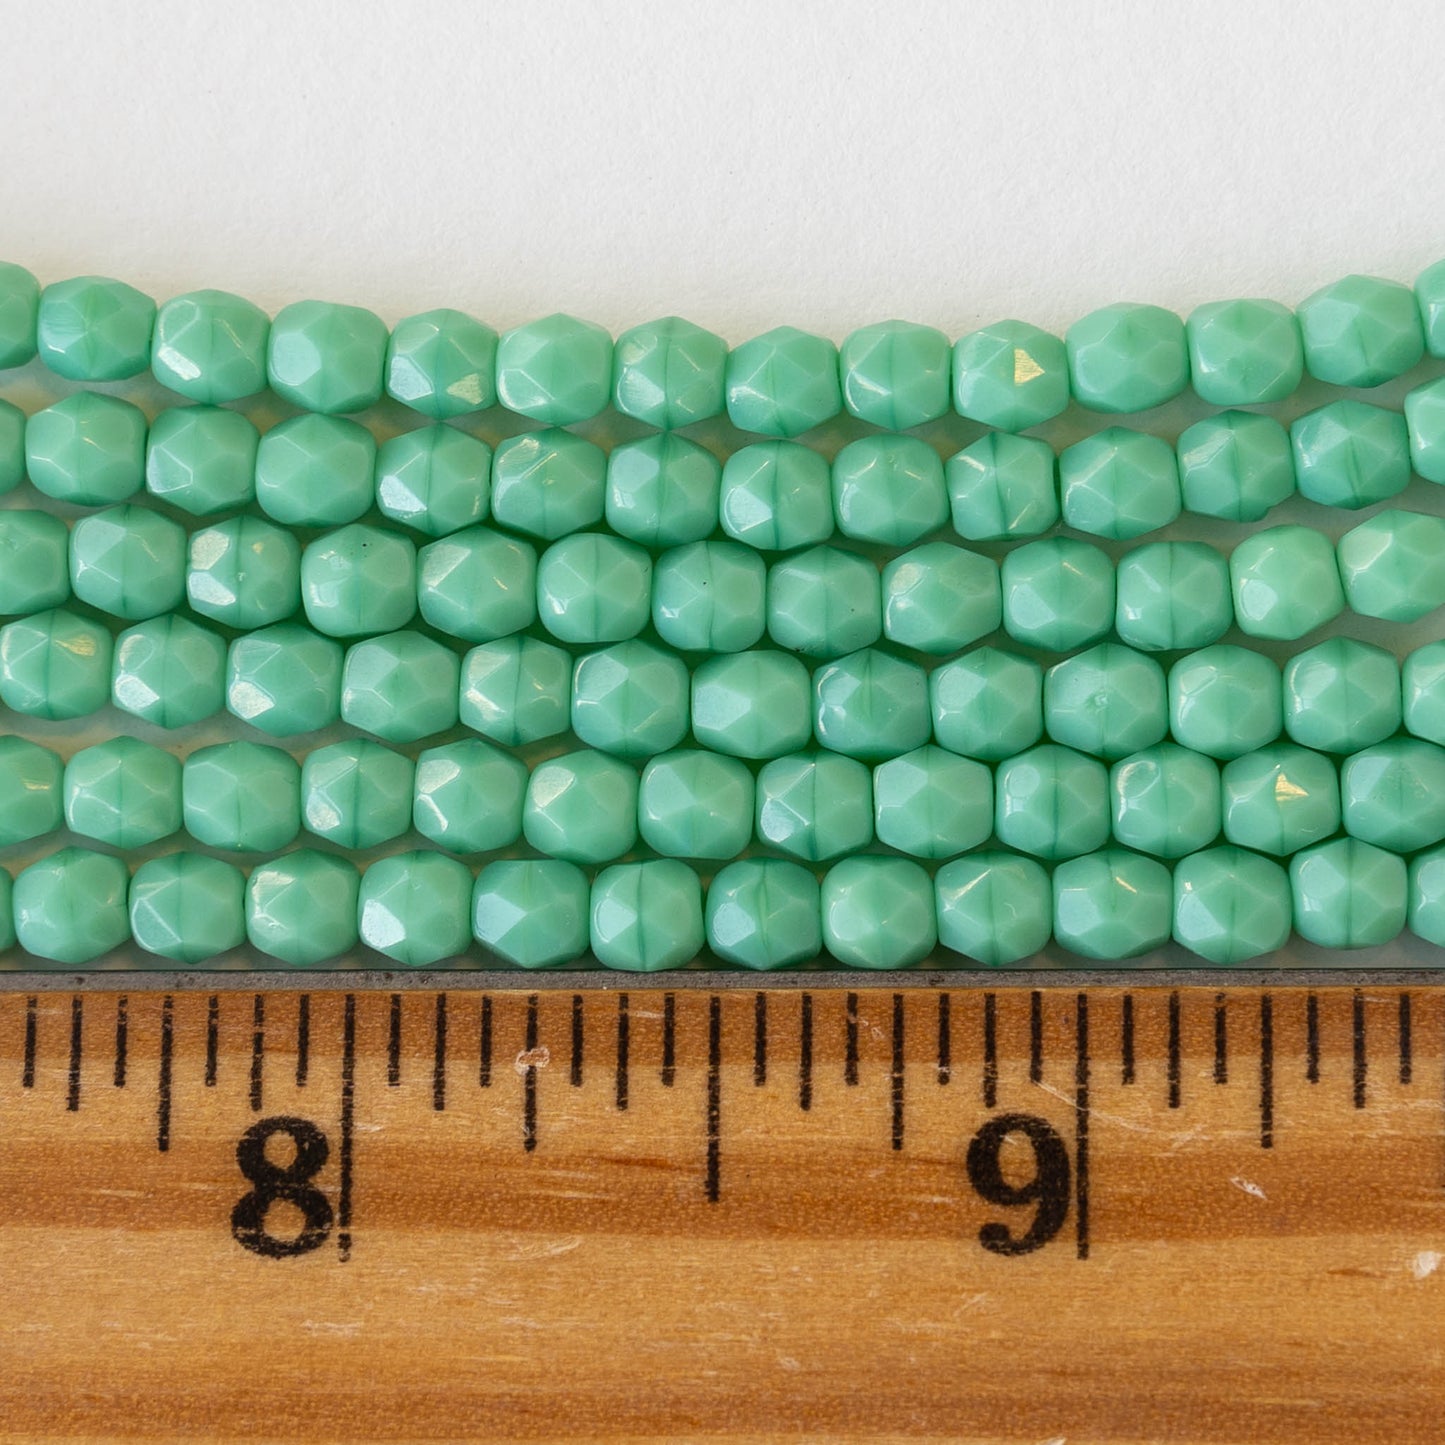 4mm Faceted Round Glass Beads - Opaque Green - 100 beads